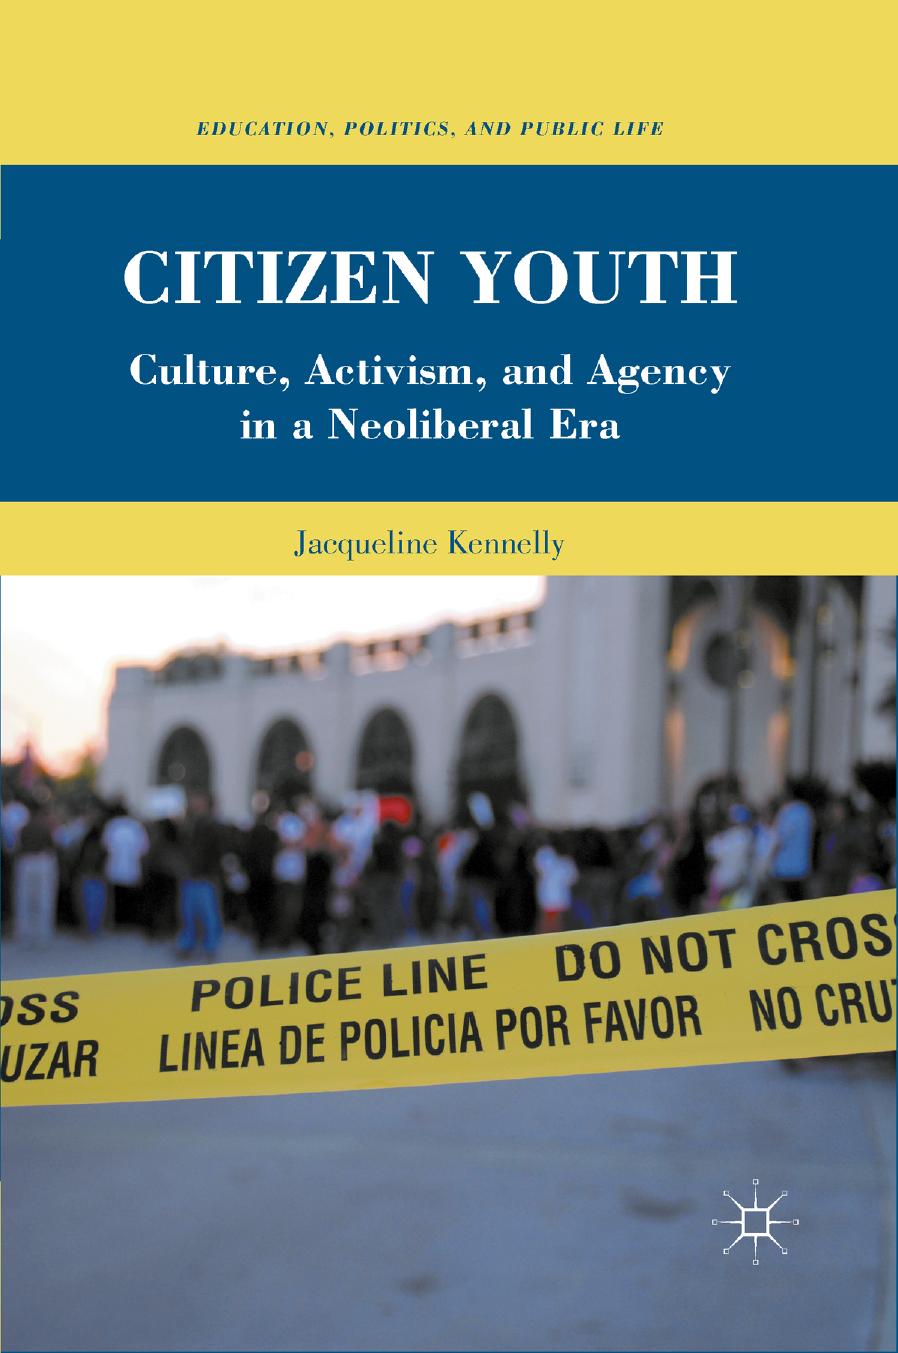 Citizen Youth  Culture, Activism, and Agency in a Neoliberal Era-Palgrave Macmillan US (2011)